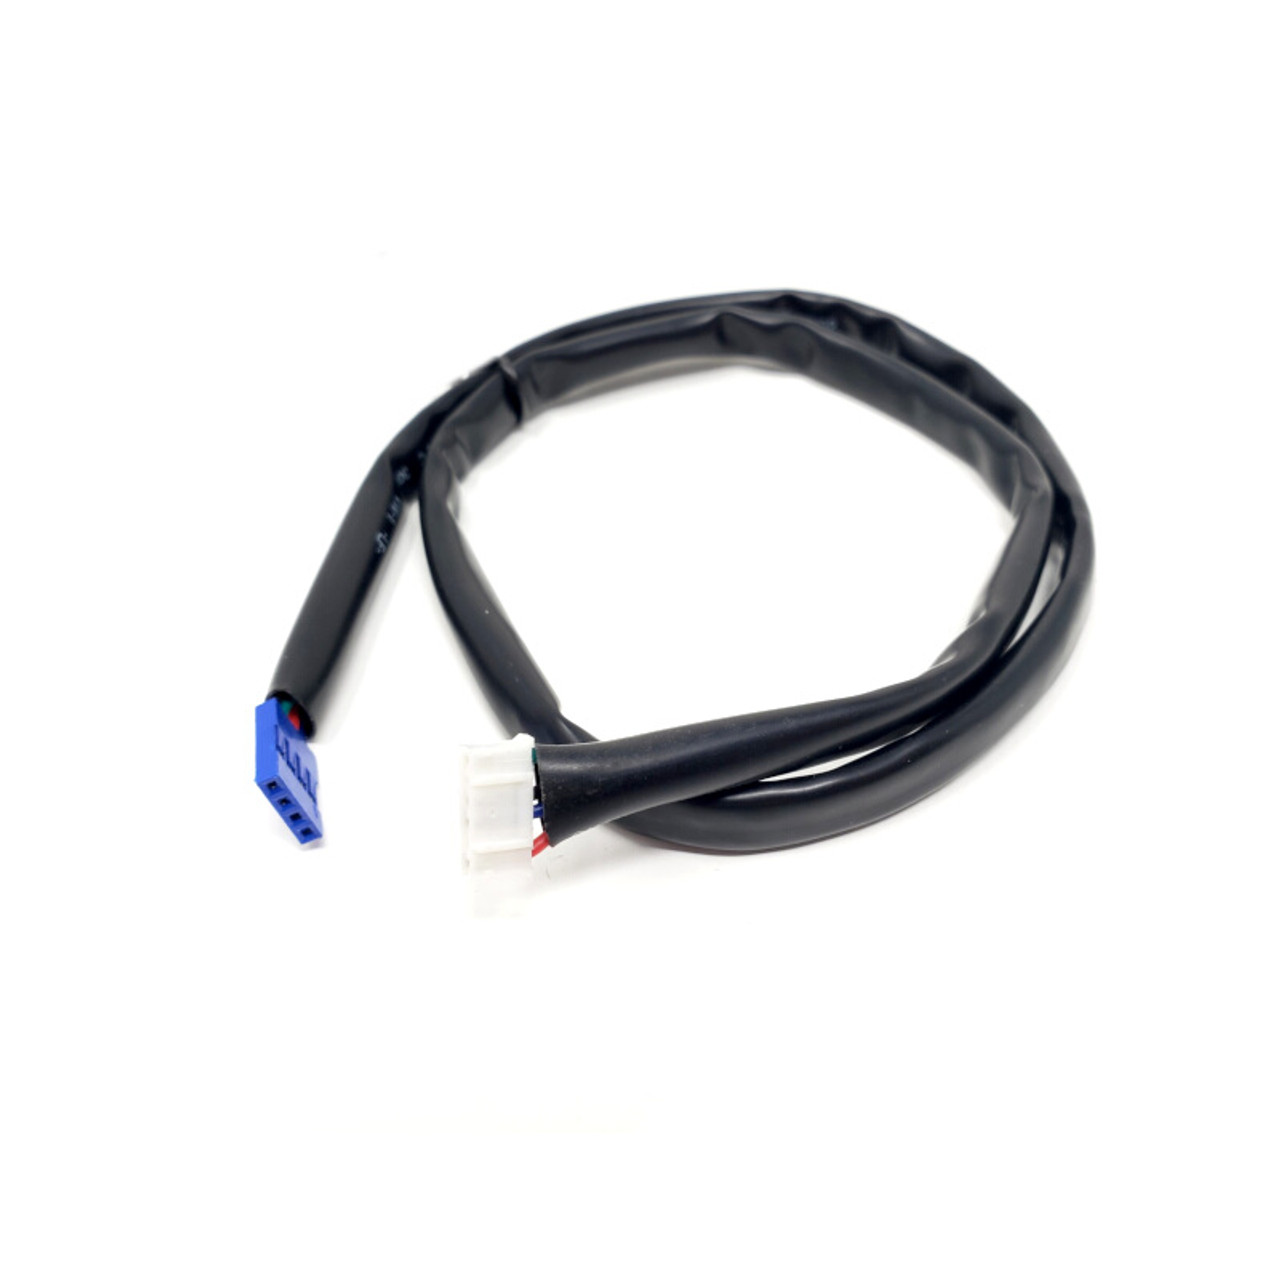 Robo C2 Extruder Ribbon Cable